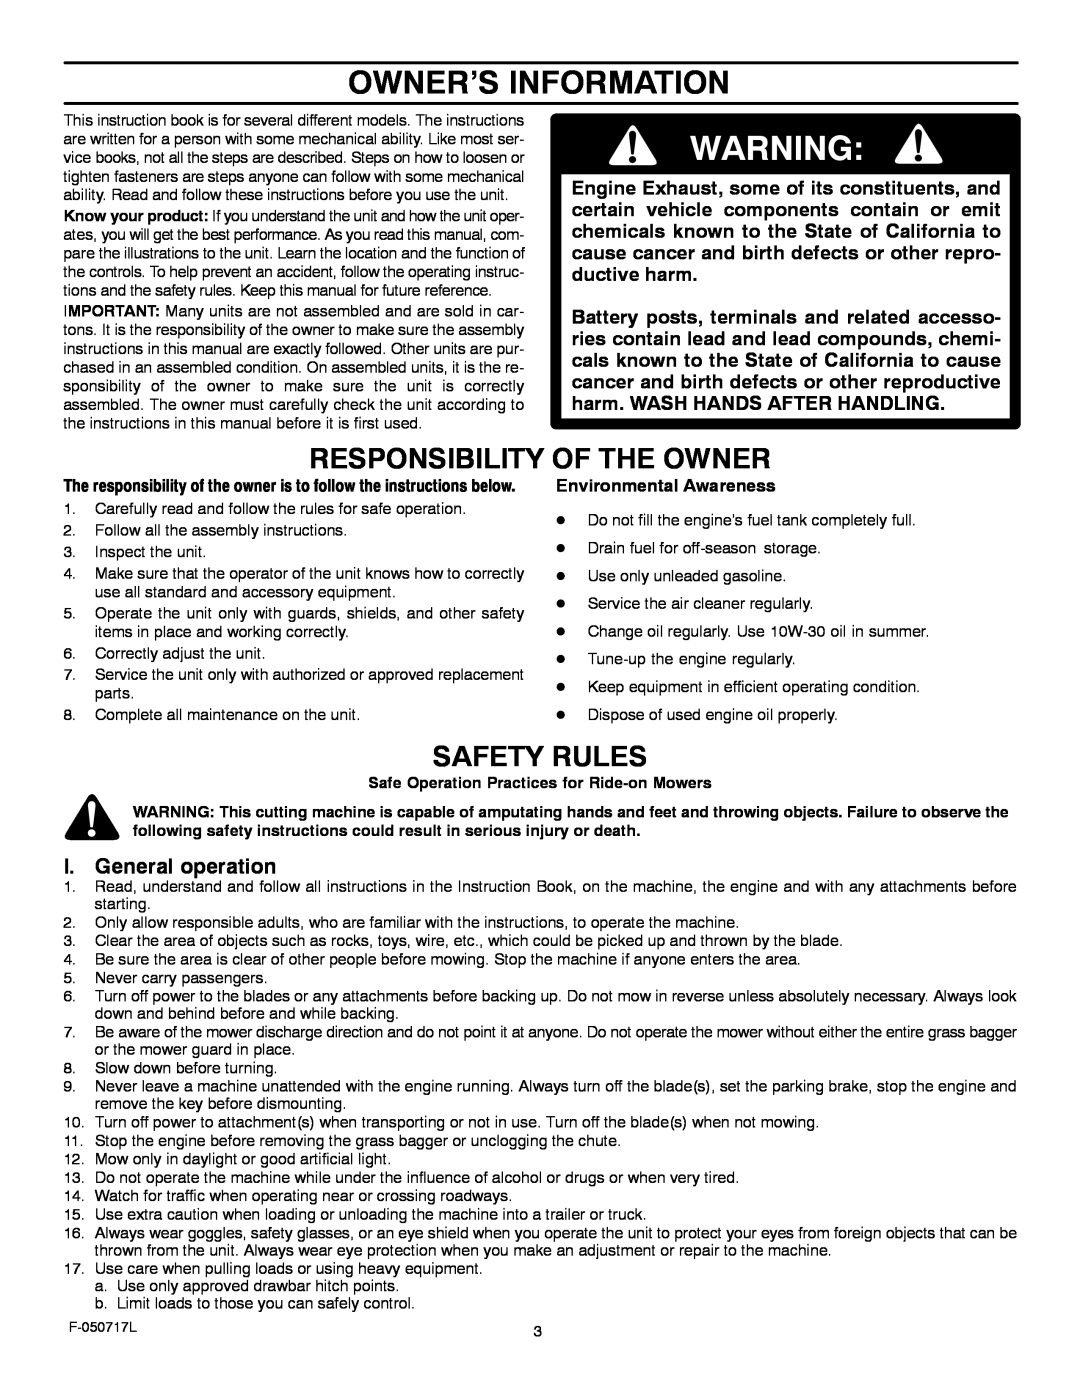 Murray 387002x92D manual Owner’S Information, Responsibility Of The Owner, Safety Rules, I. General operation 